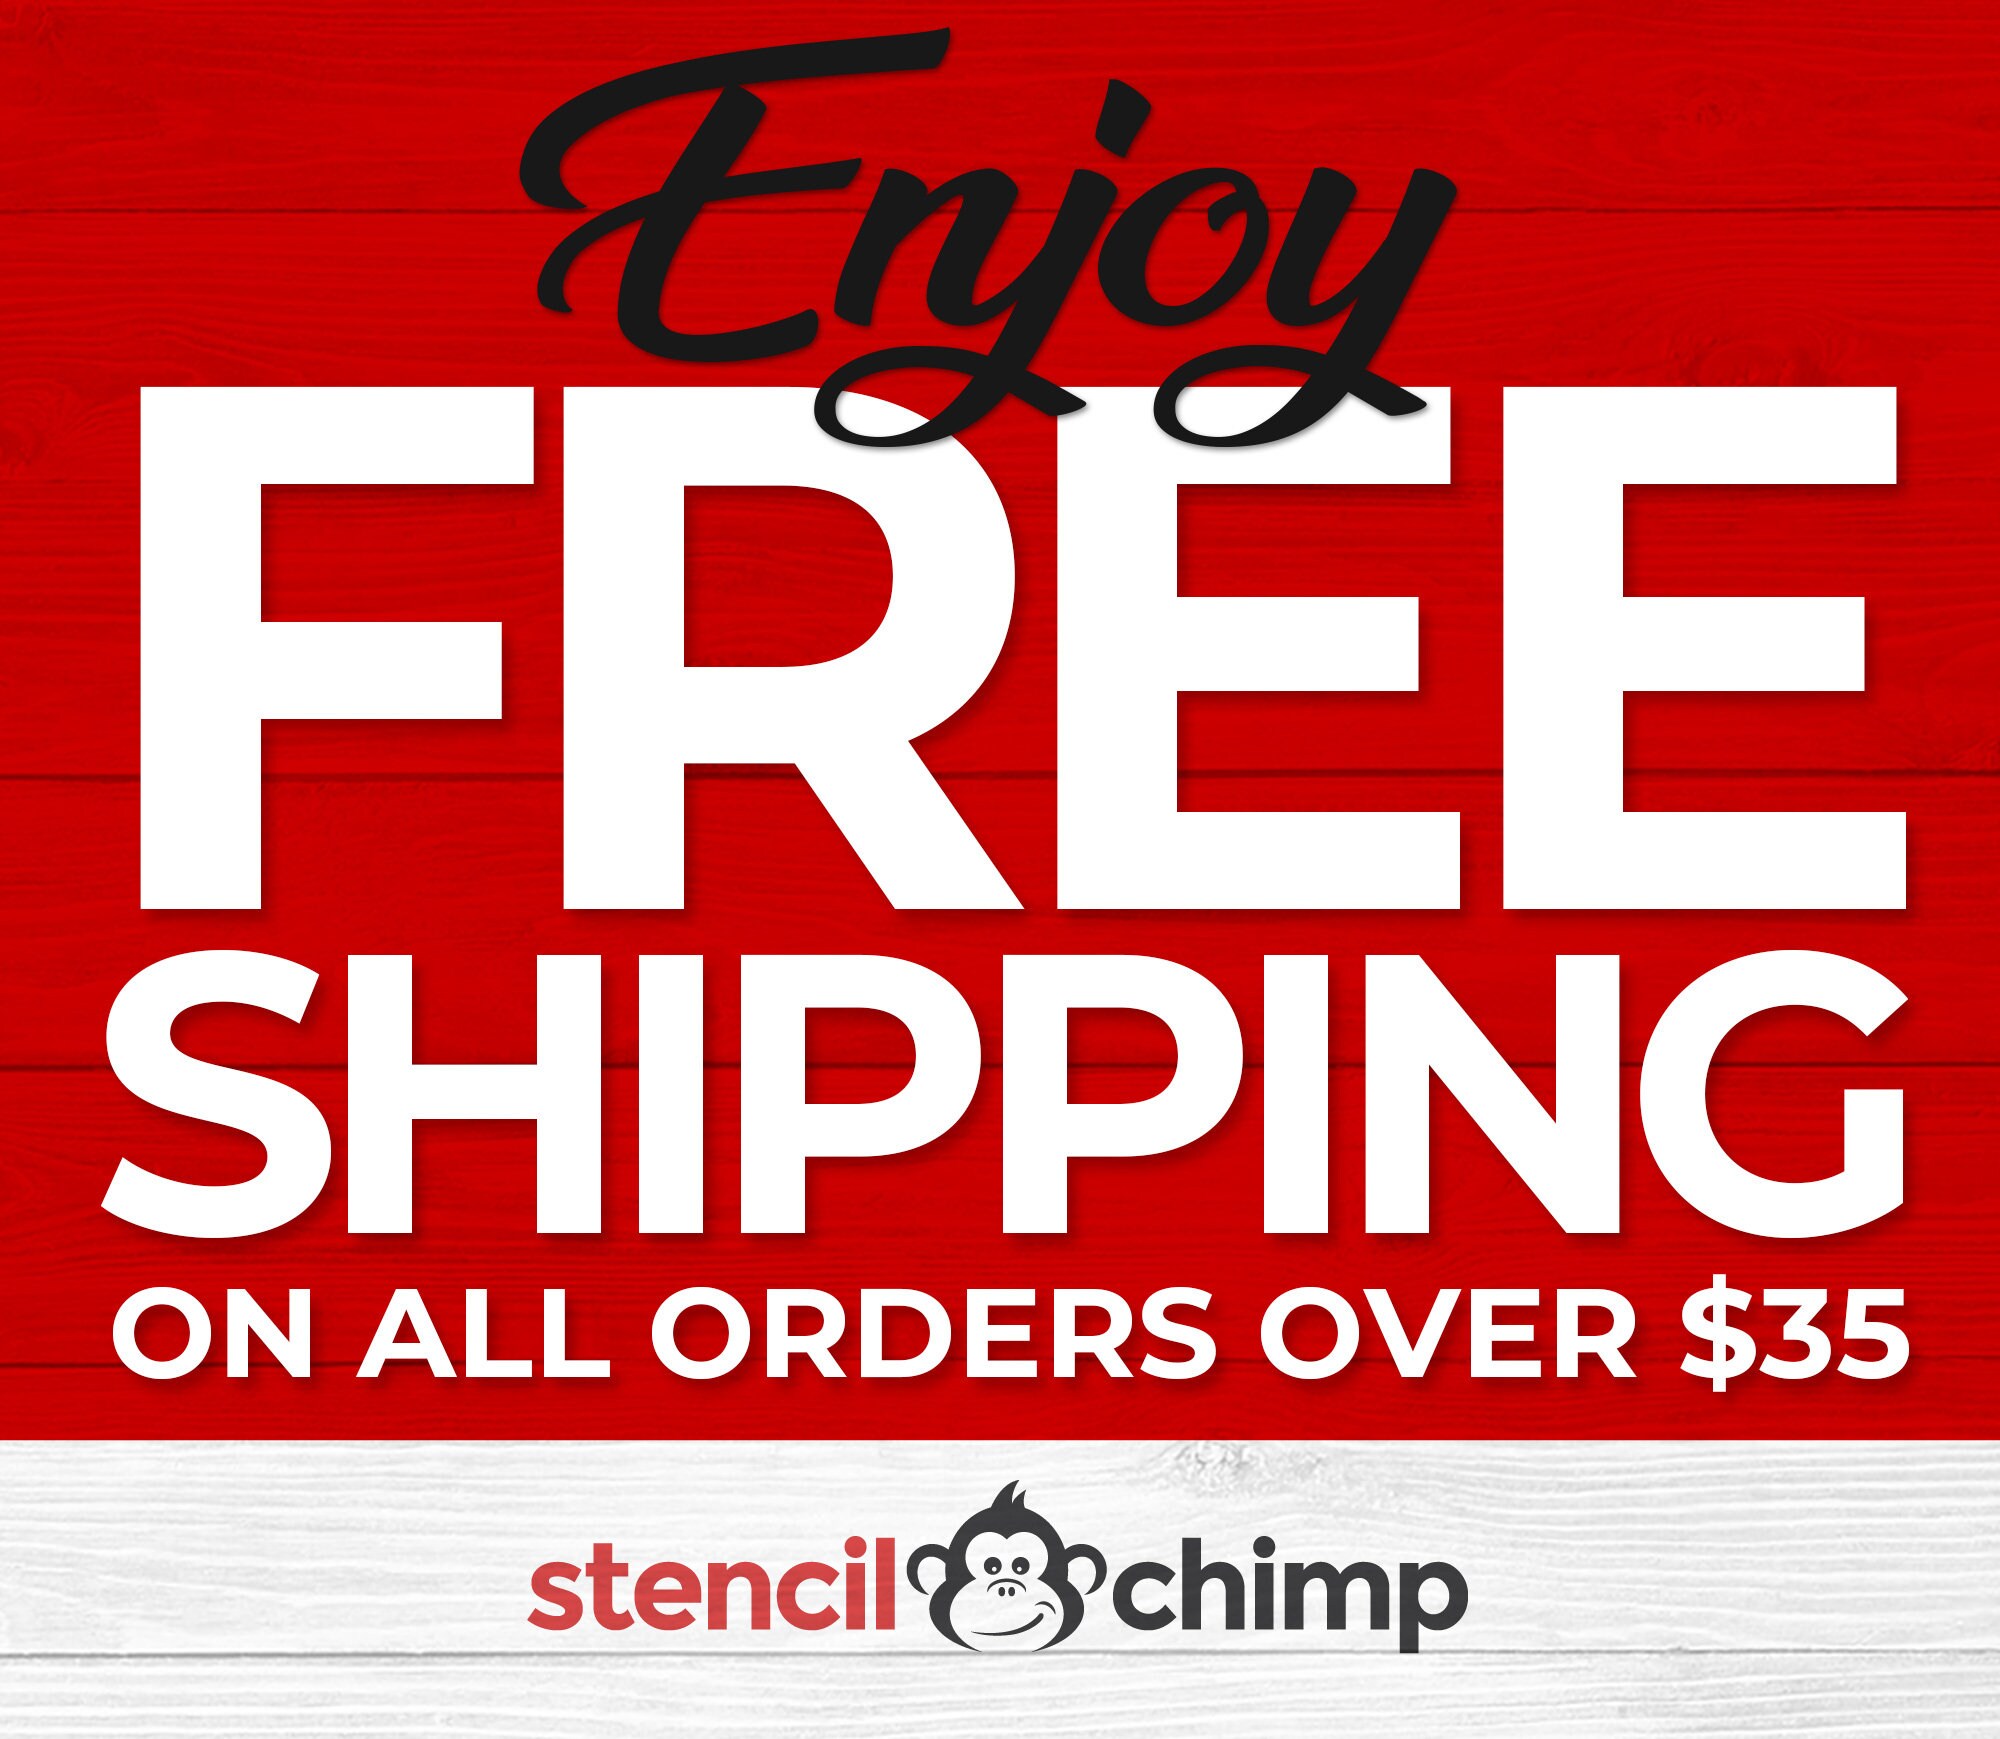 FREE SHIPPING on ANY $35 ORDER with PROMO CODE FRSHP35 - Penn Herb Co. Ltd.